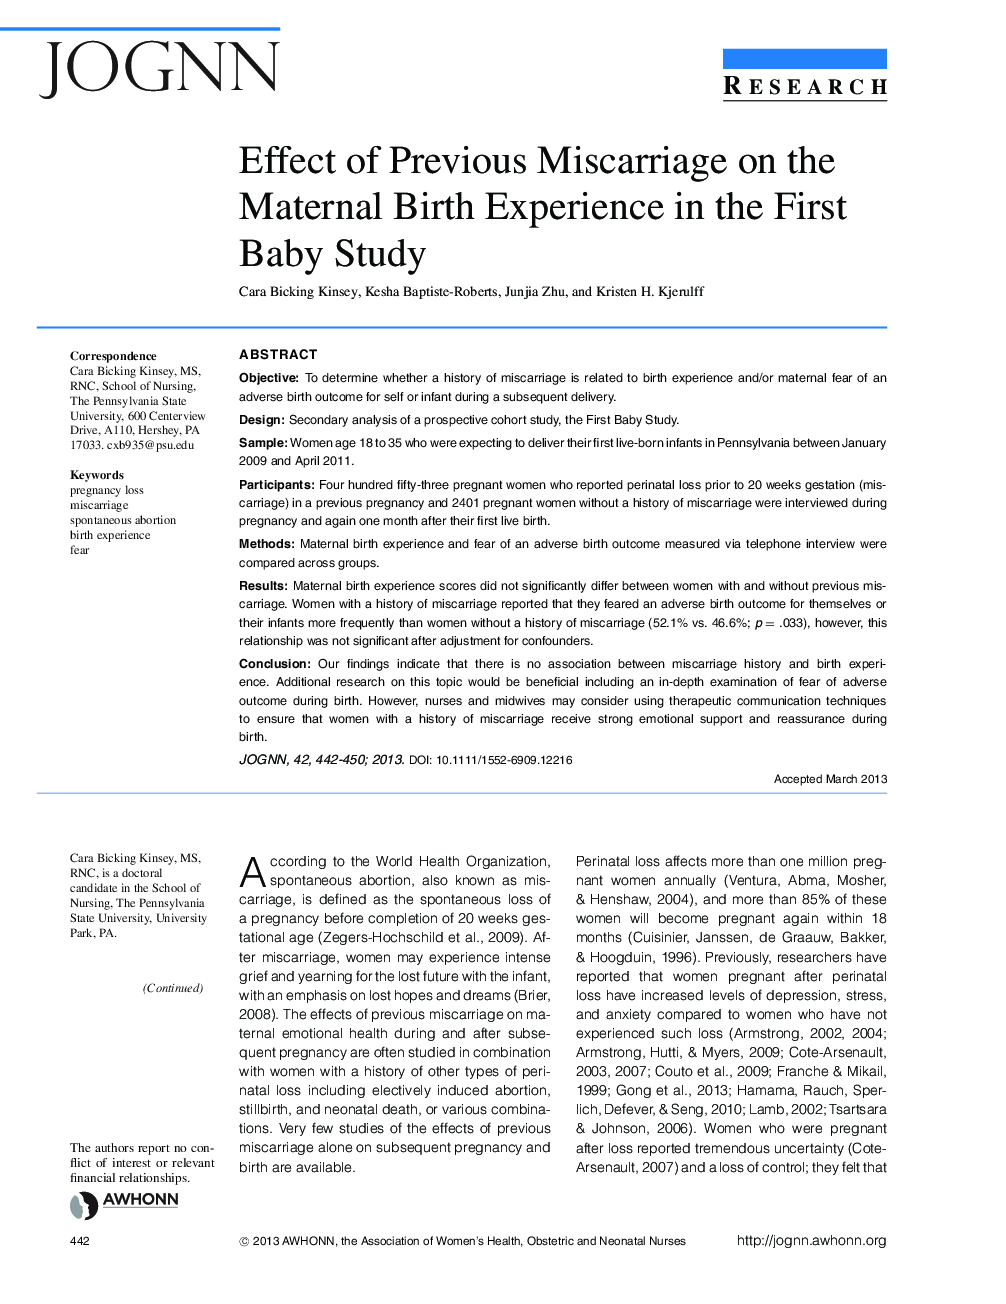 Effect of Previous Miscarriage on the Maternal Birth Experience in the First Baby Study